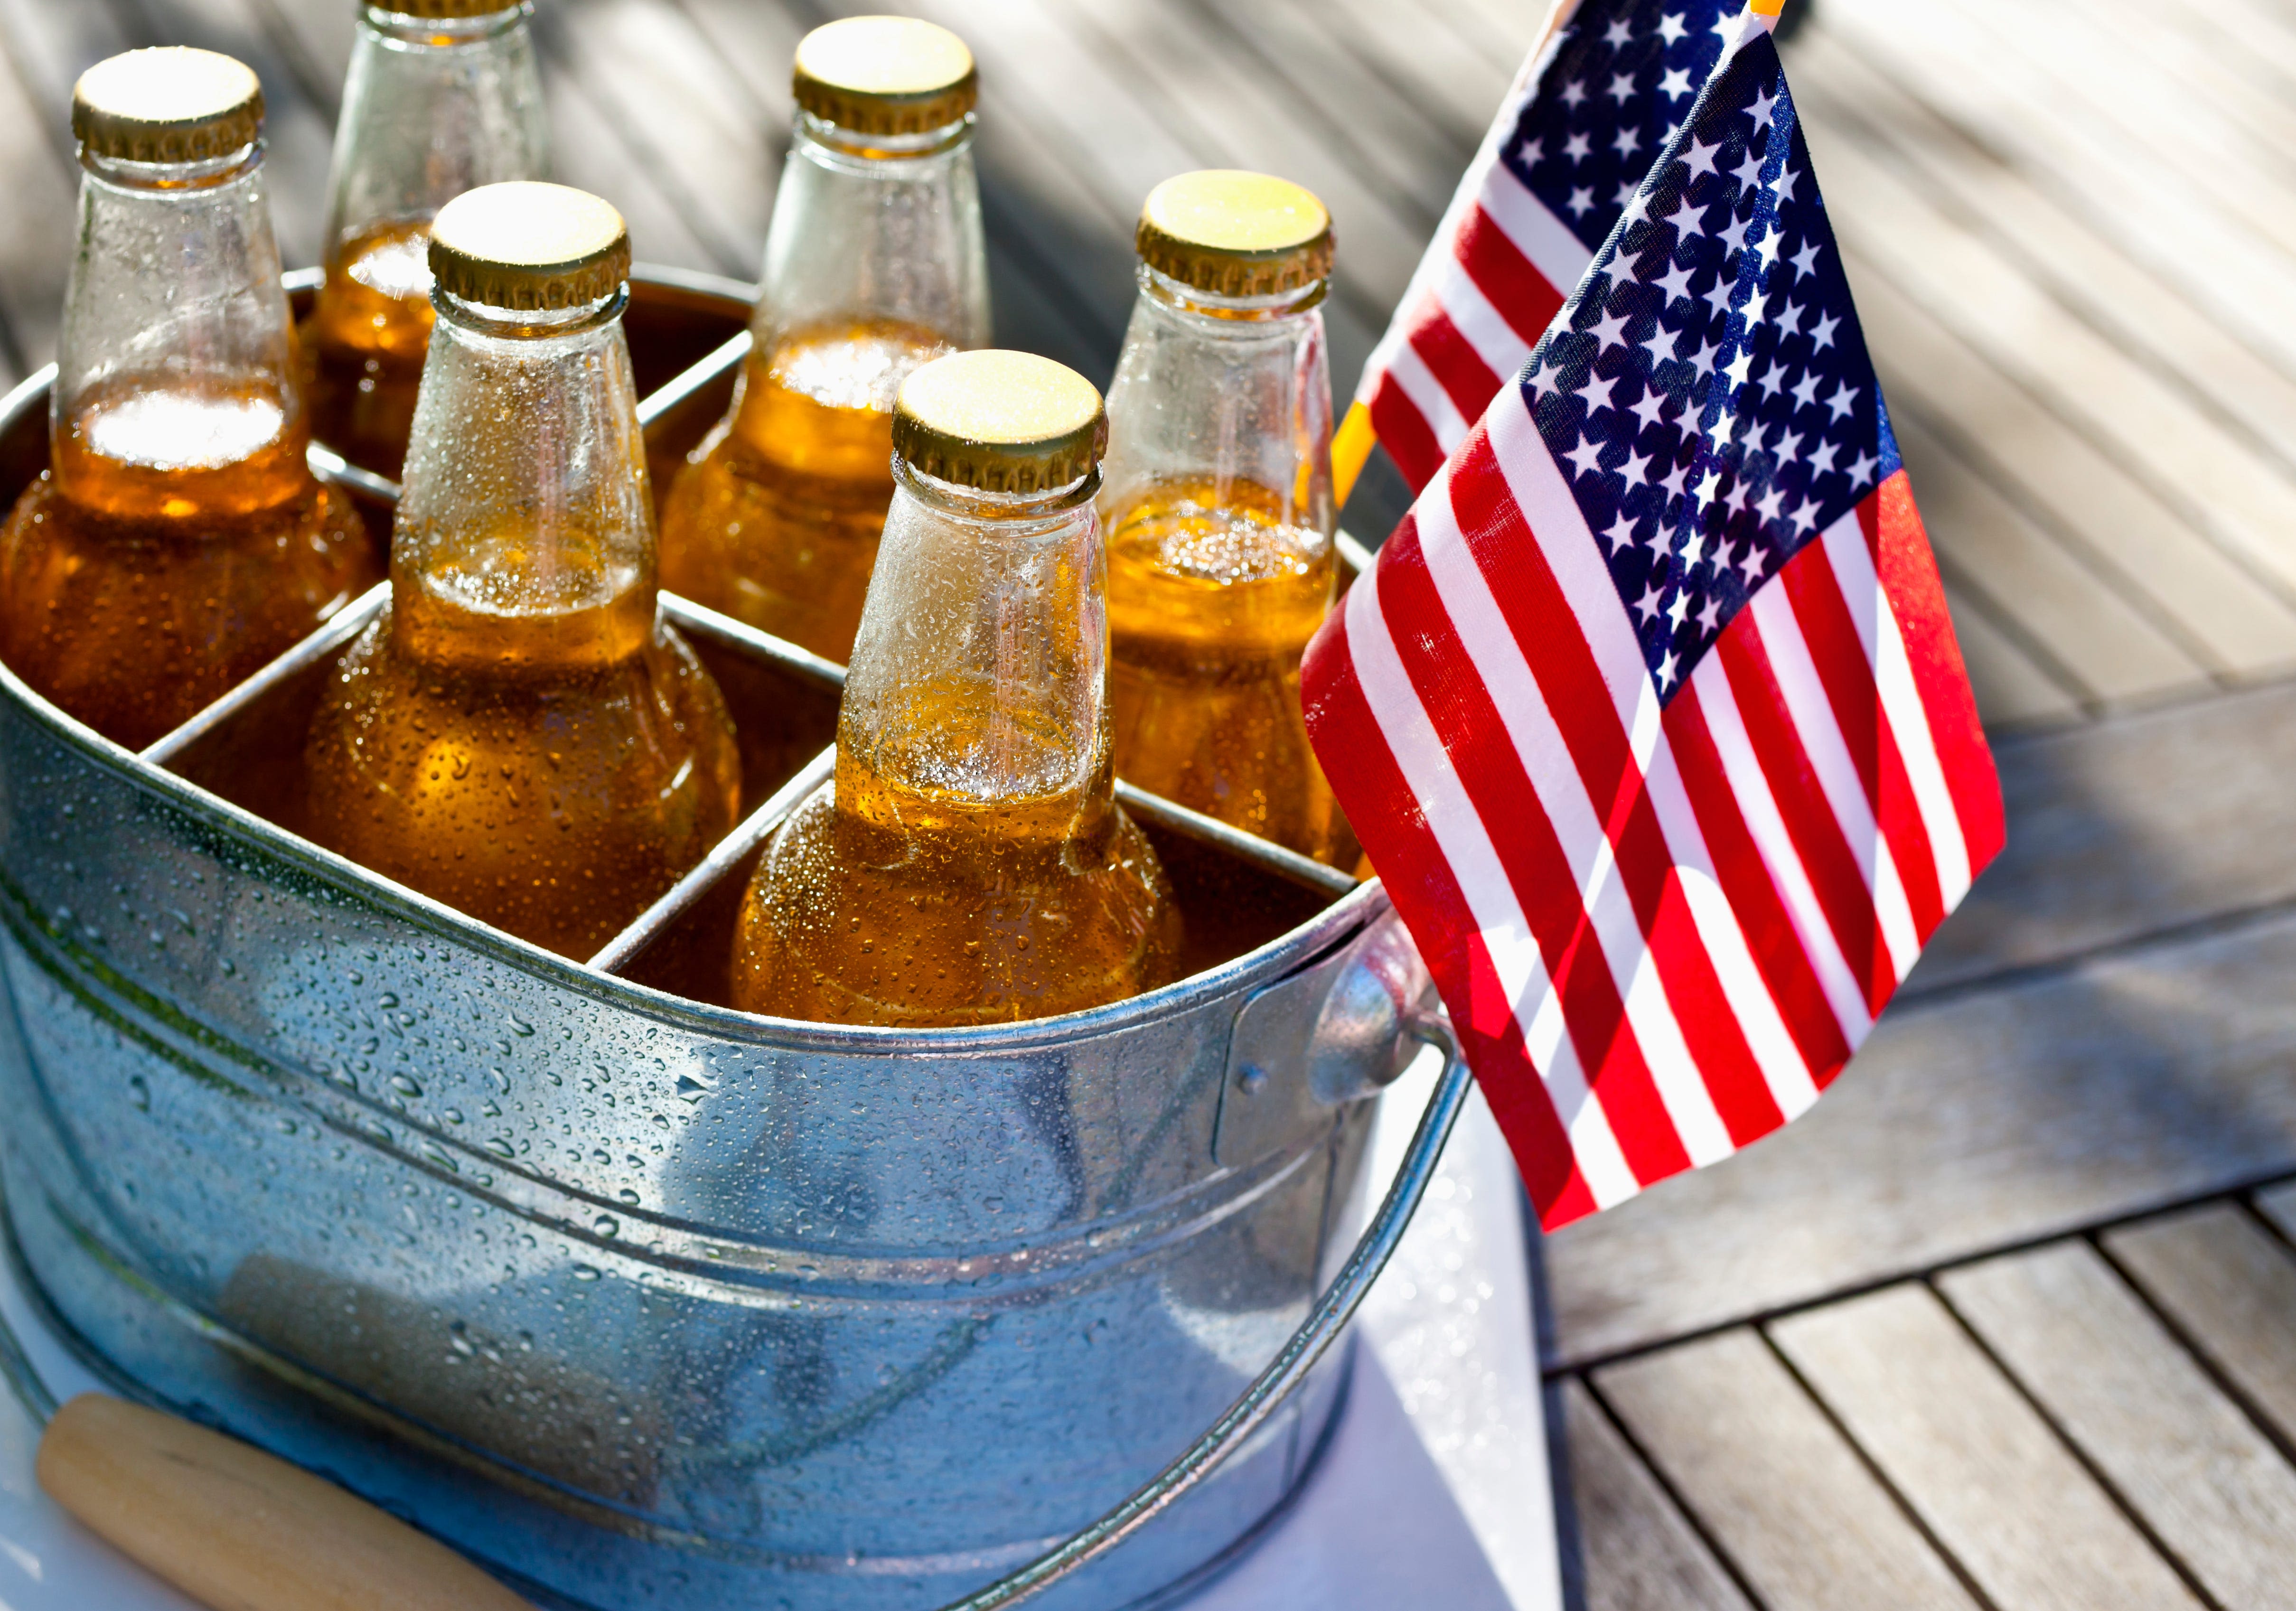 Can you buy alcohol on July 4th? A look at alcohol laws by state in the US